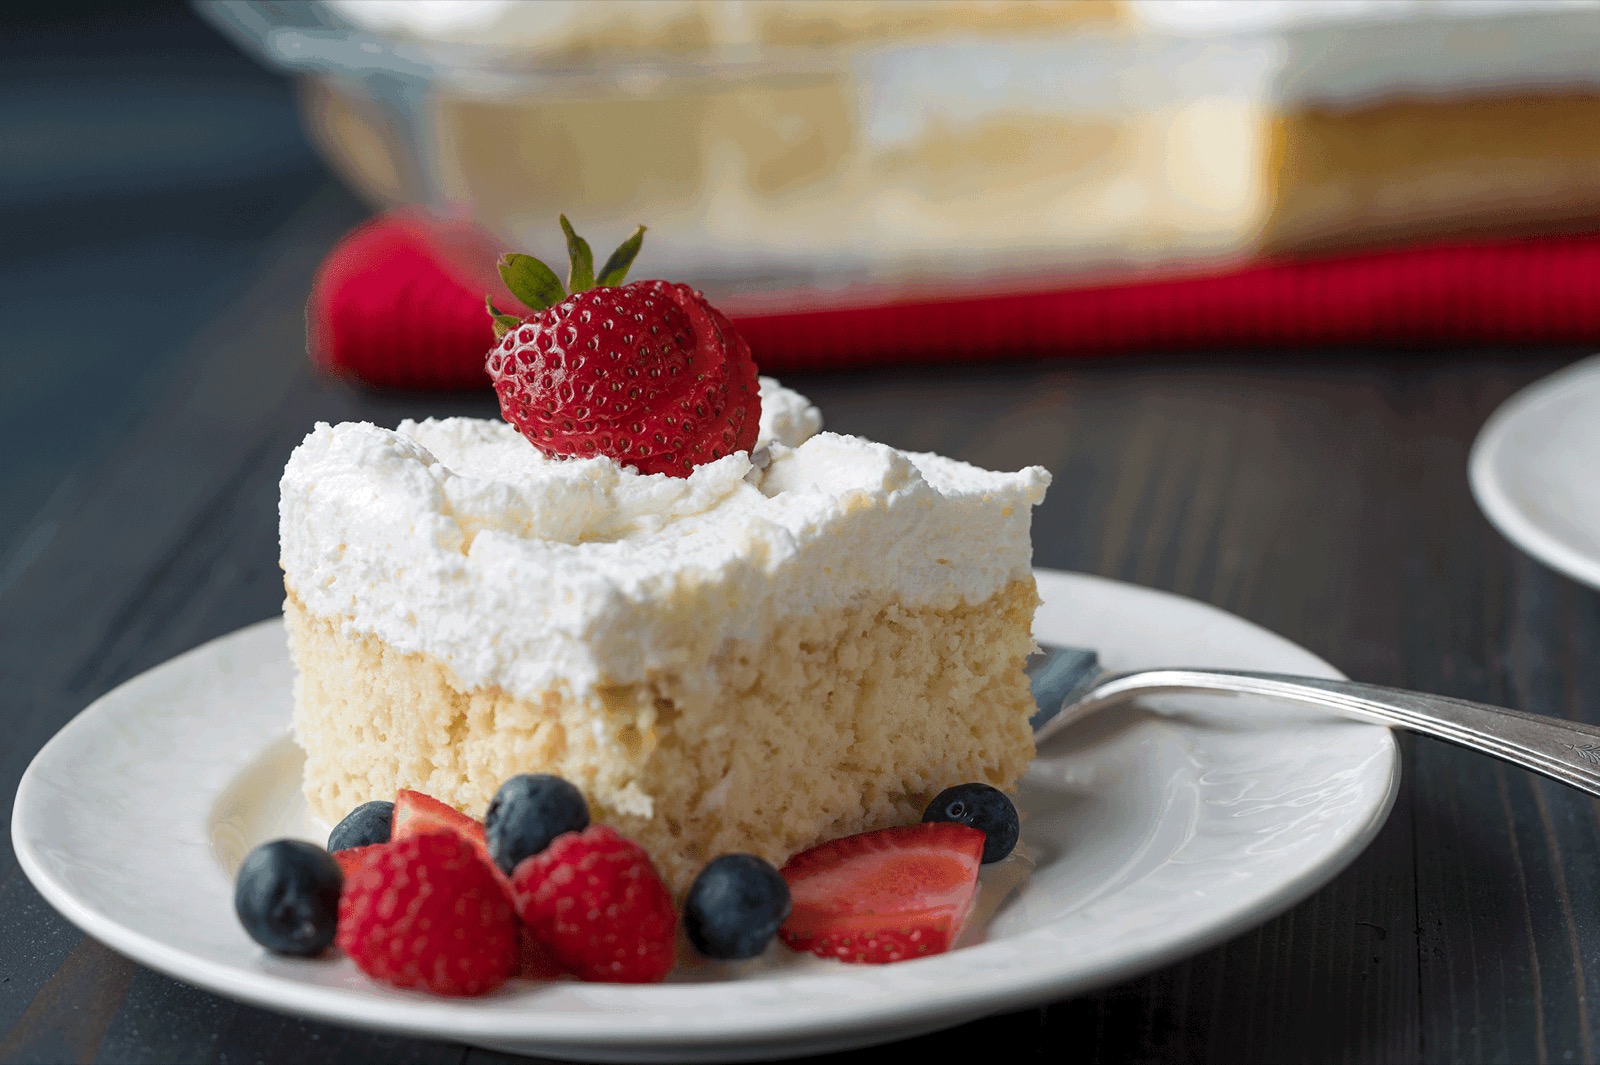 We’ll Give You a Way to Unwind Based on the 🍨 Desserts You Pick in This Quiz Tres Leches Cake